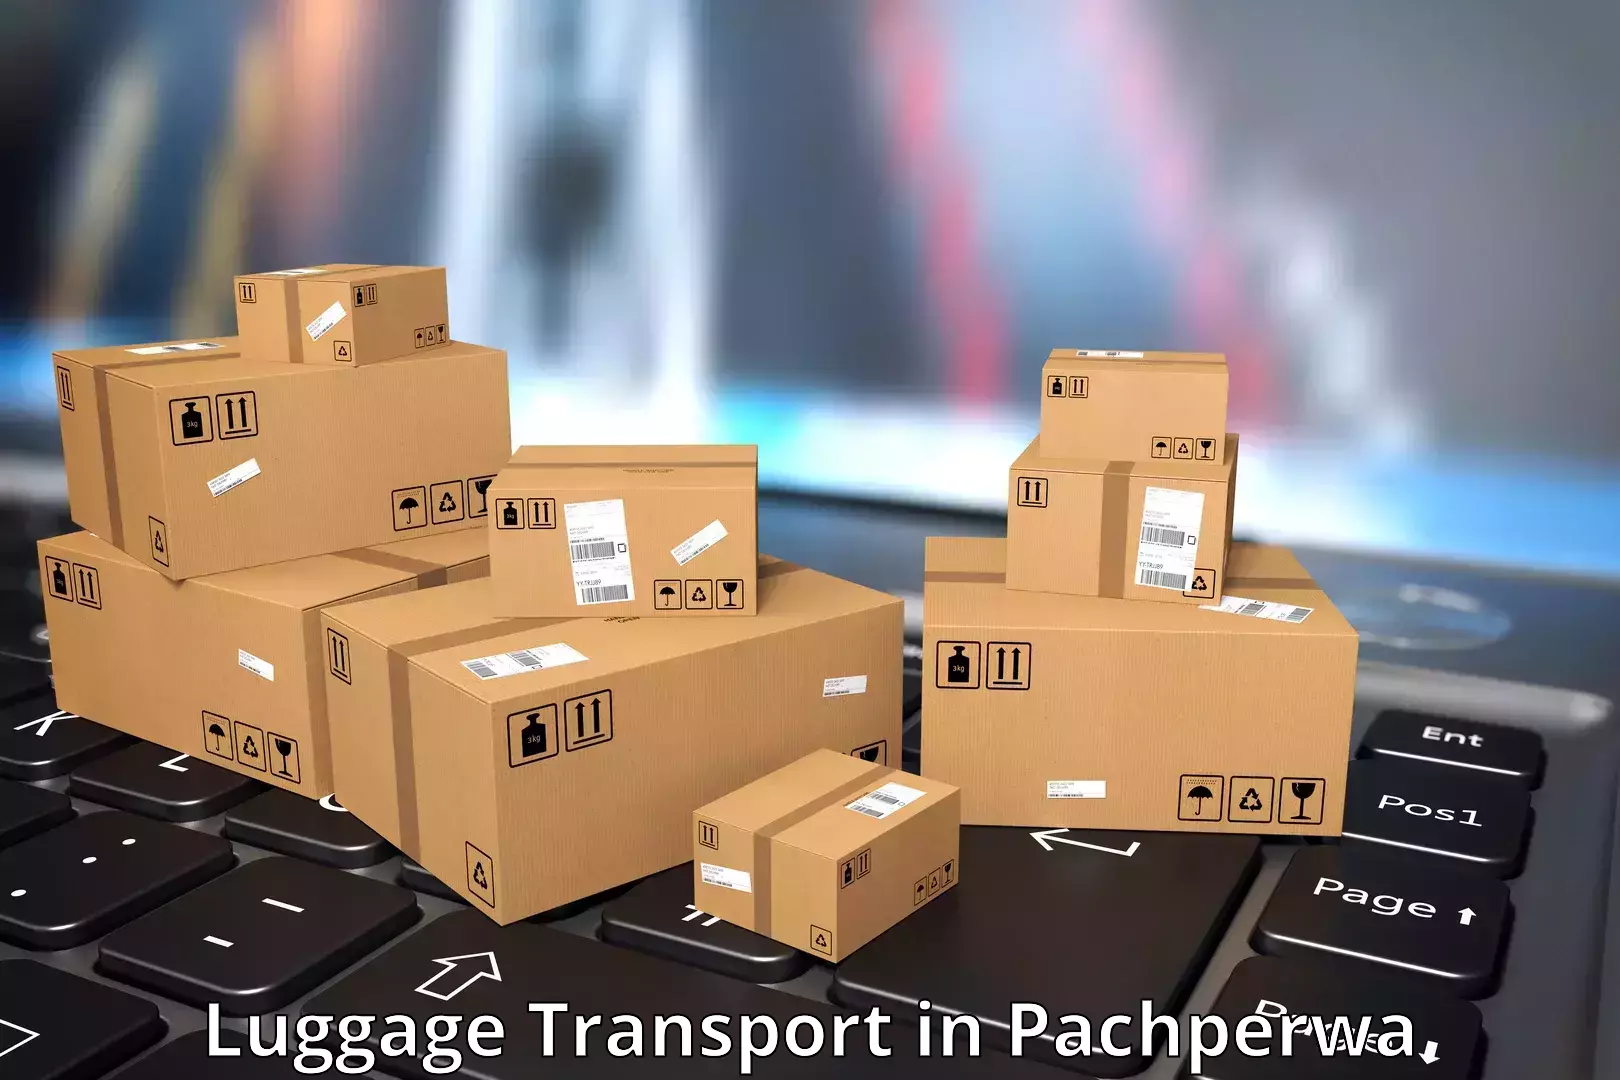 Luggage delivery system in Pachperwa